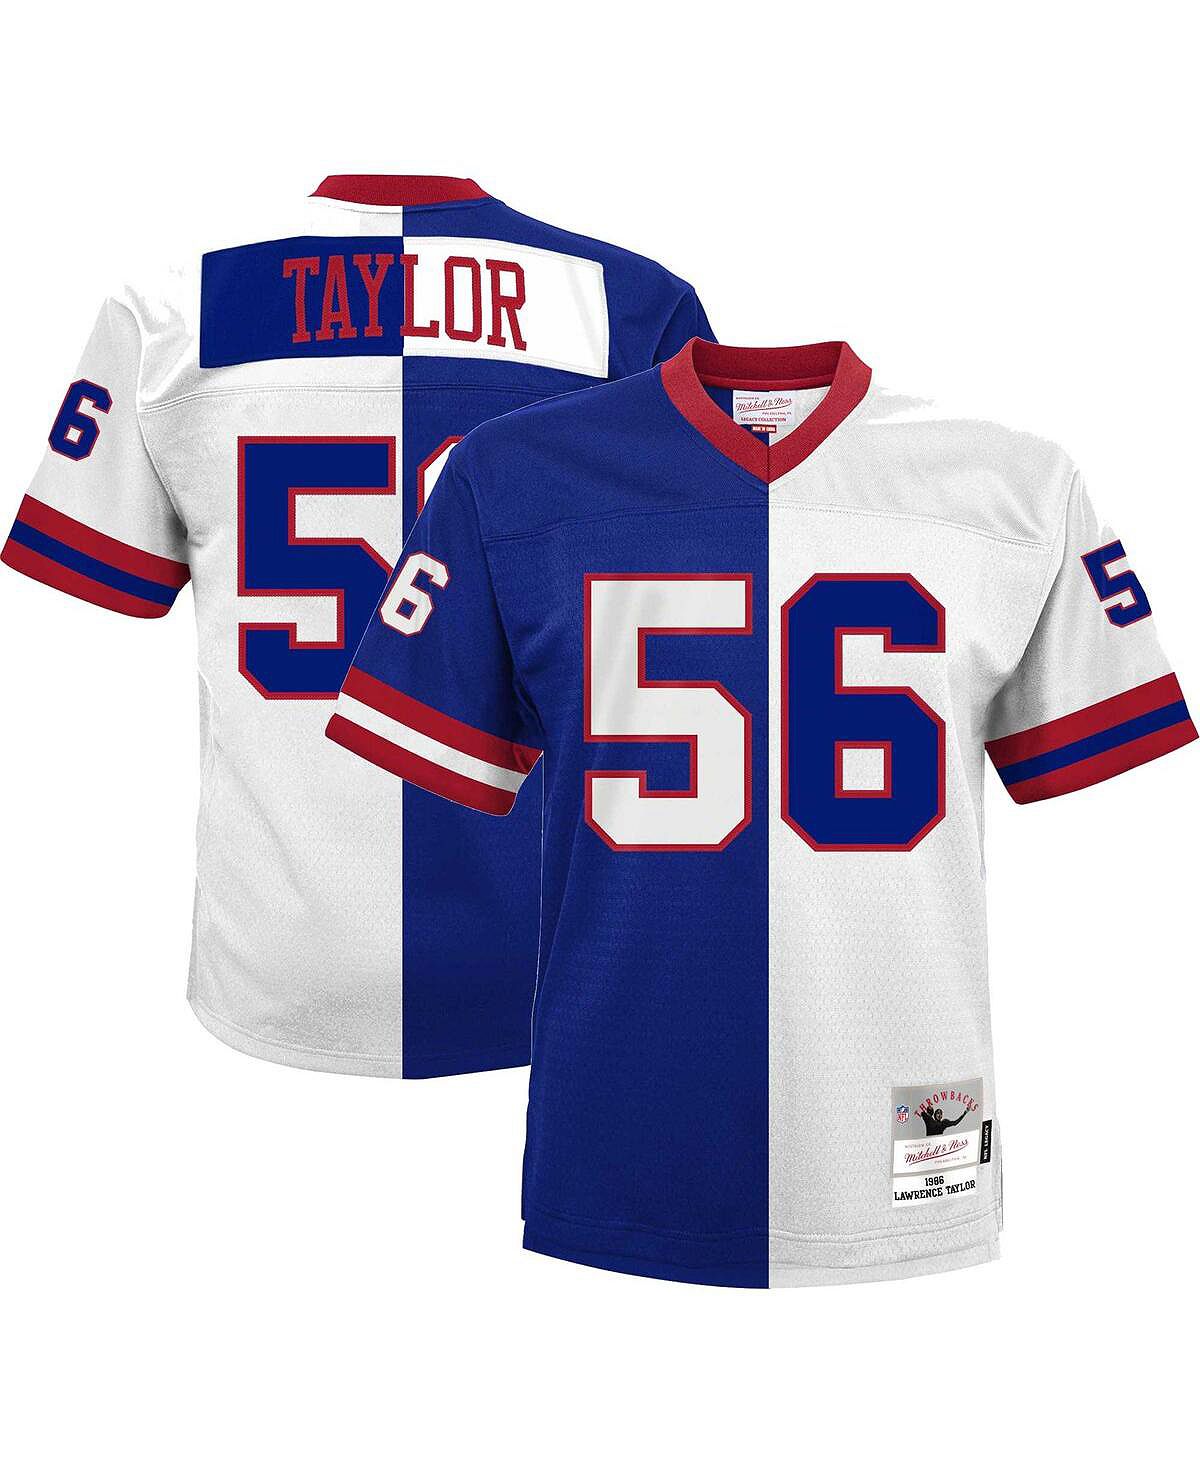 Мужская футболка lawrence taylor royal and white new york giants big and tall split legacy replica player на пенсии Mitchell & Ness, мульти new giants youth s fans rugby jerseys lawrence taylor saquon barkley sports fans american football new york jersey t shirts